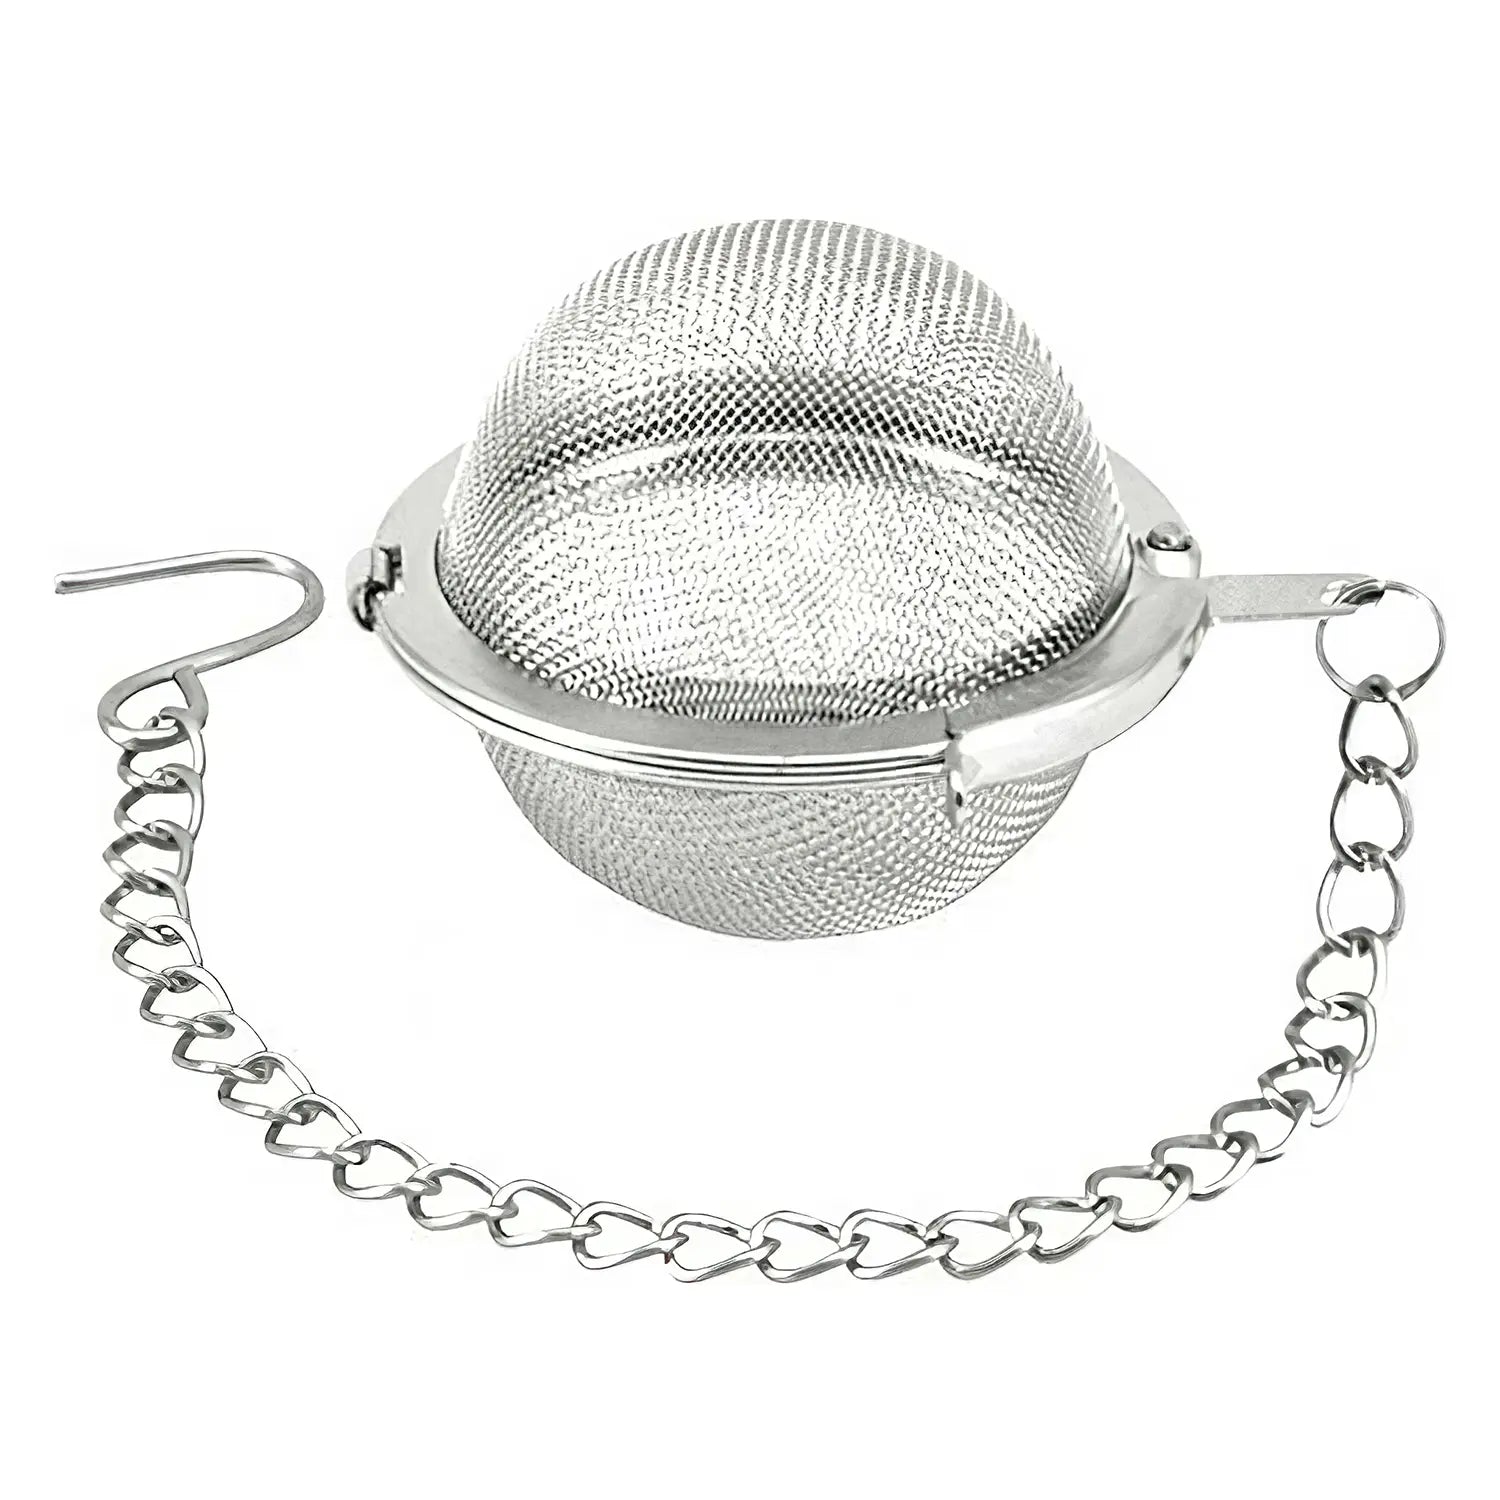 Choice 2 Stainless Steel Tea Ball Infuser